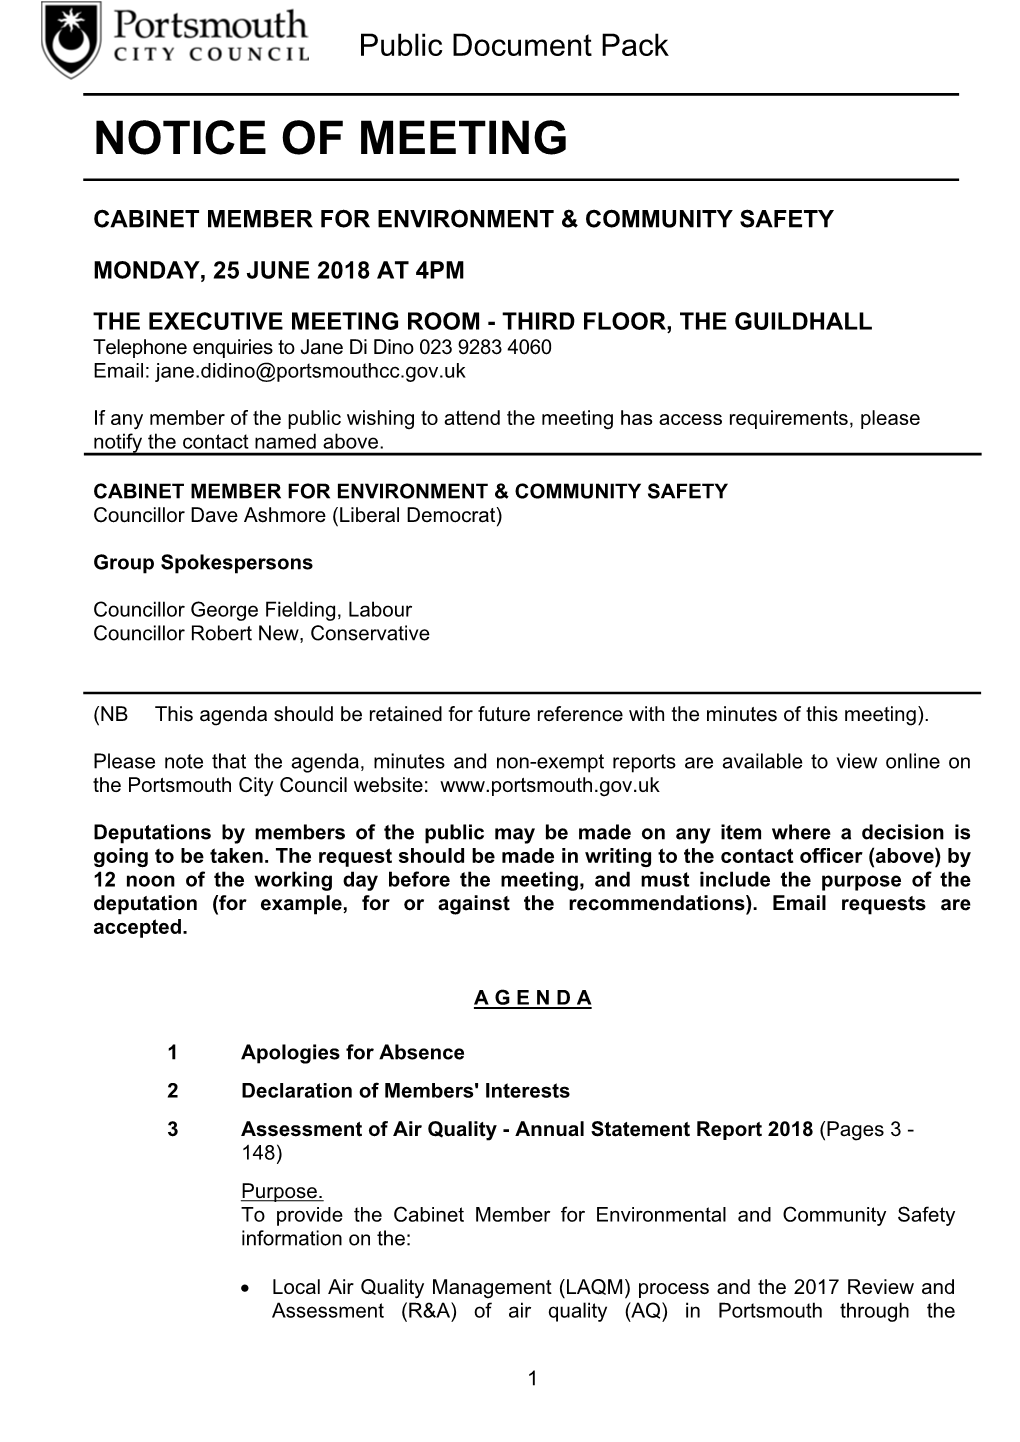 (Public Pack)Agenda Document for Cabinet Member for Environment & Community Safety, 25/06/2018 16:00